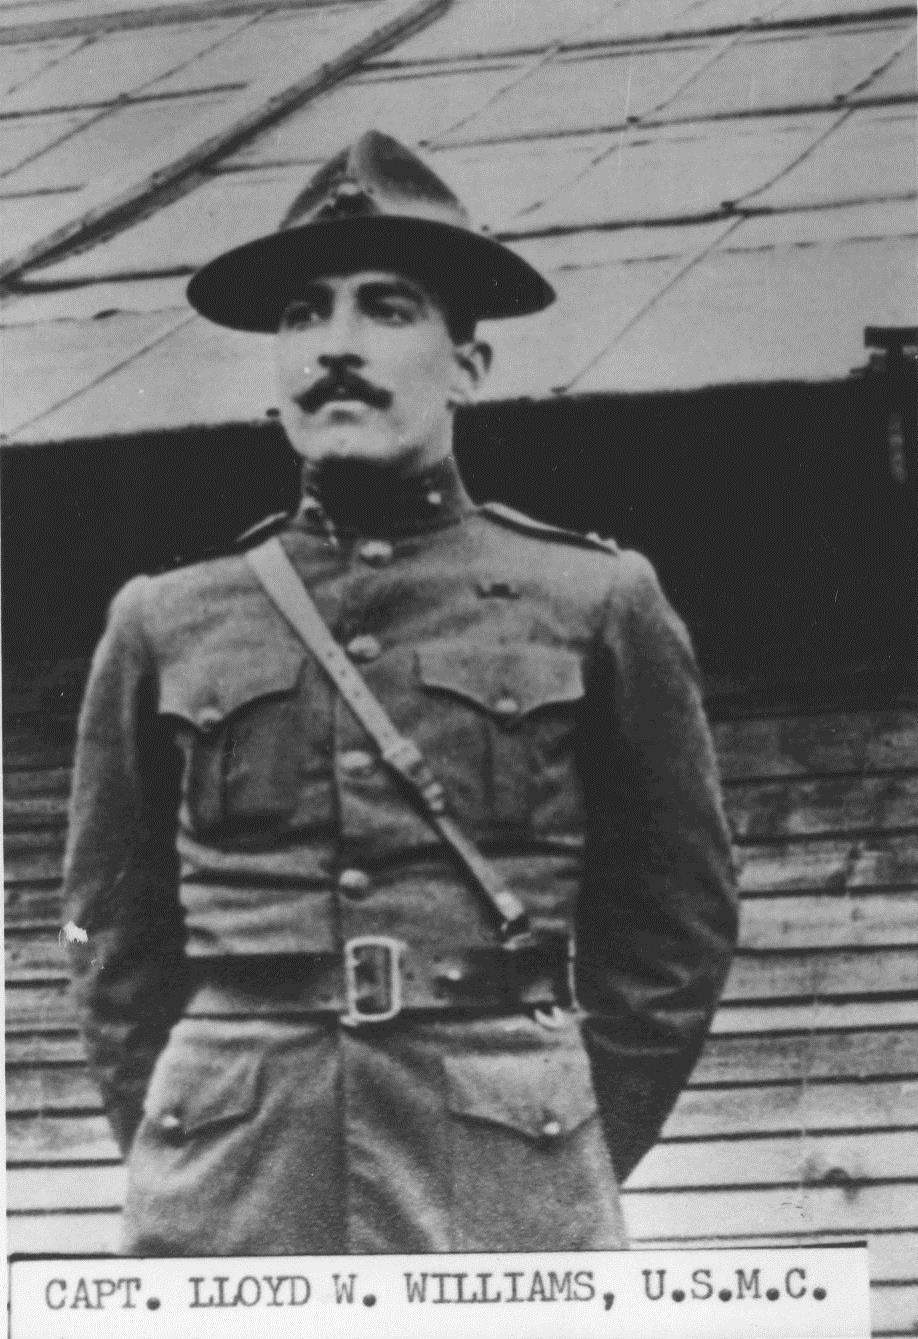 an old time military man posing in uniform